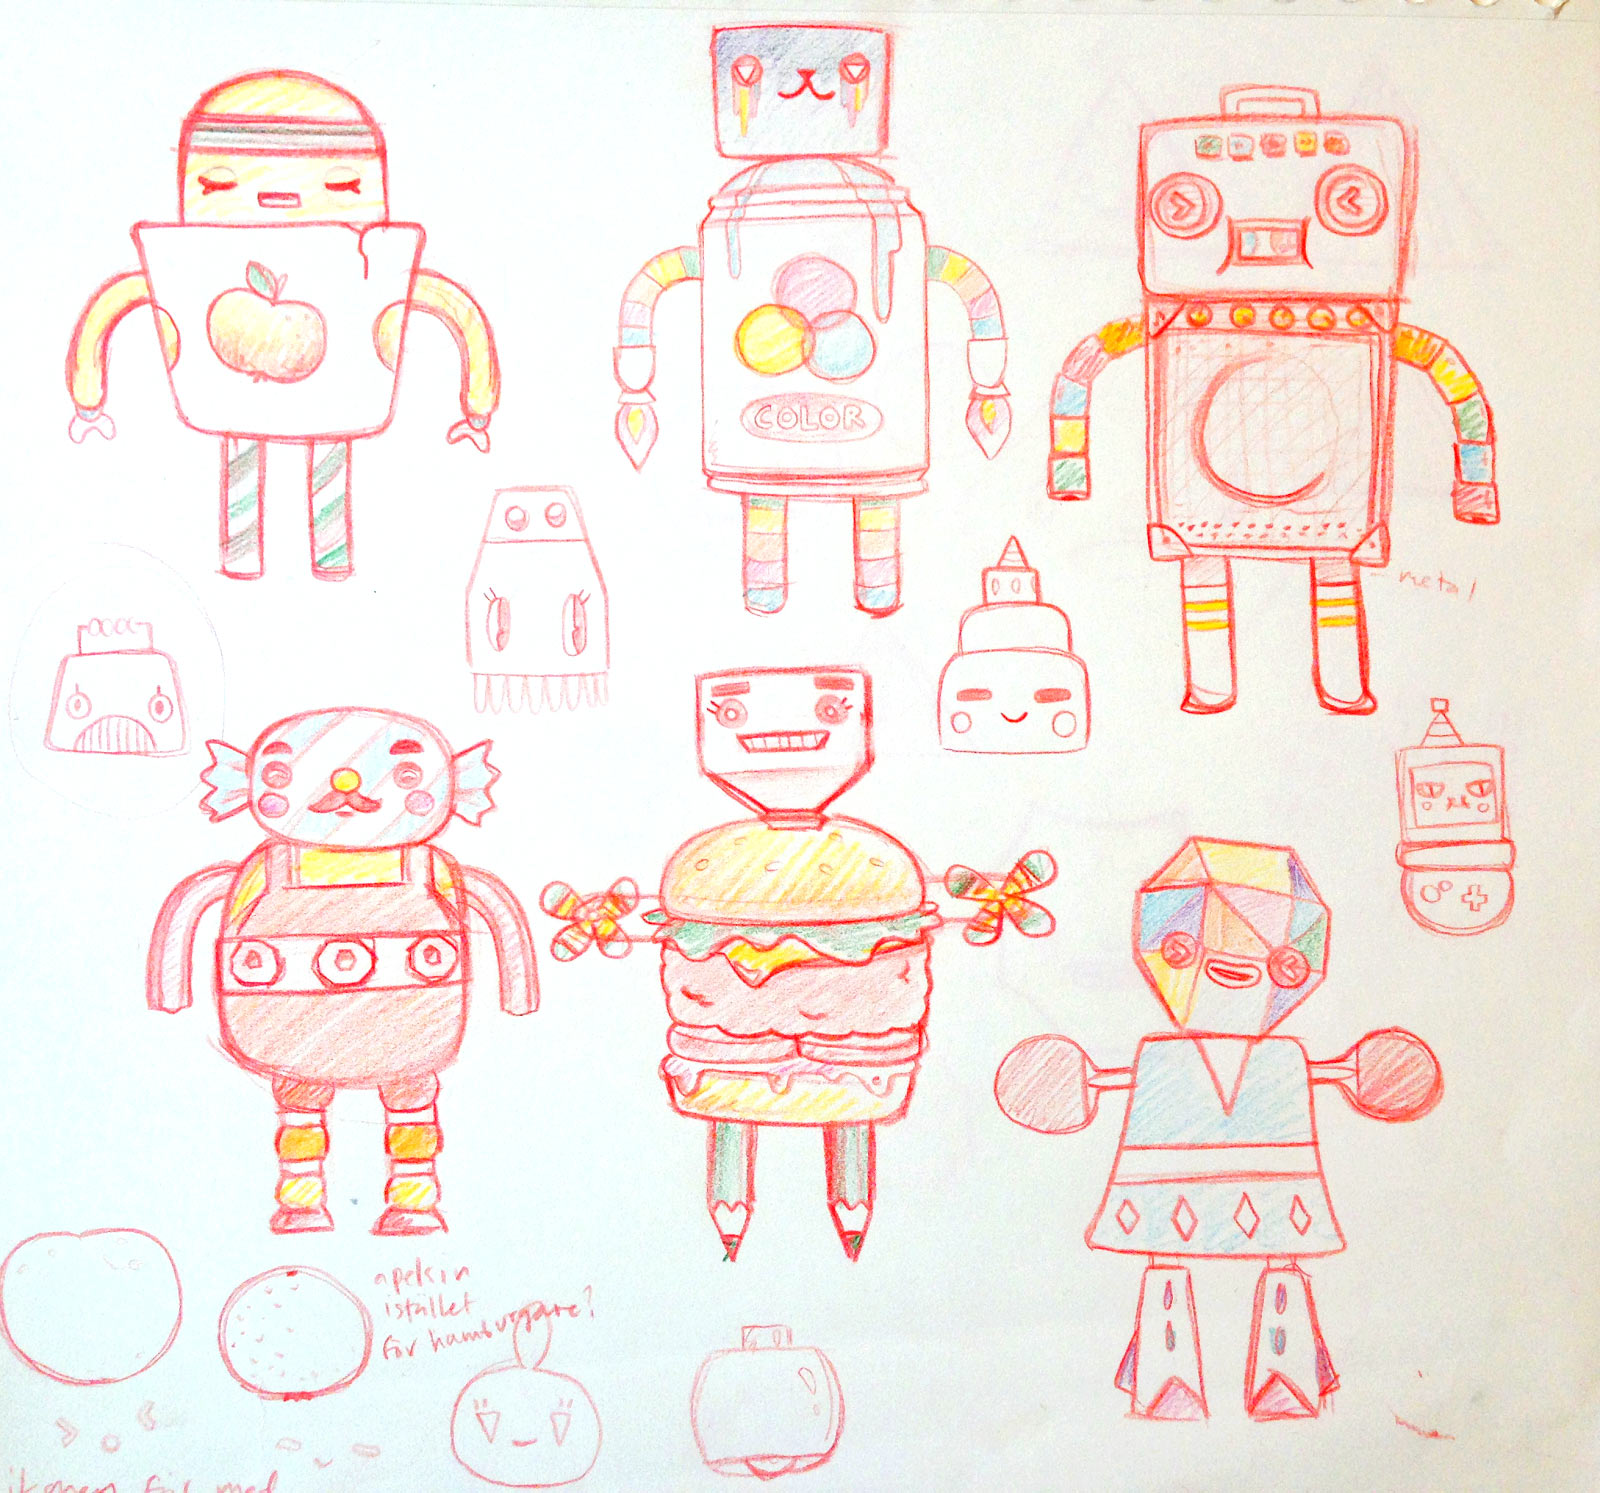 Redesigning Toca Robot Lab to be gender neutral.